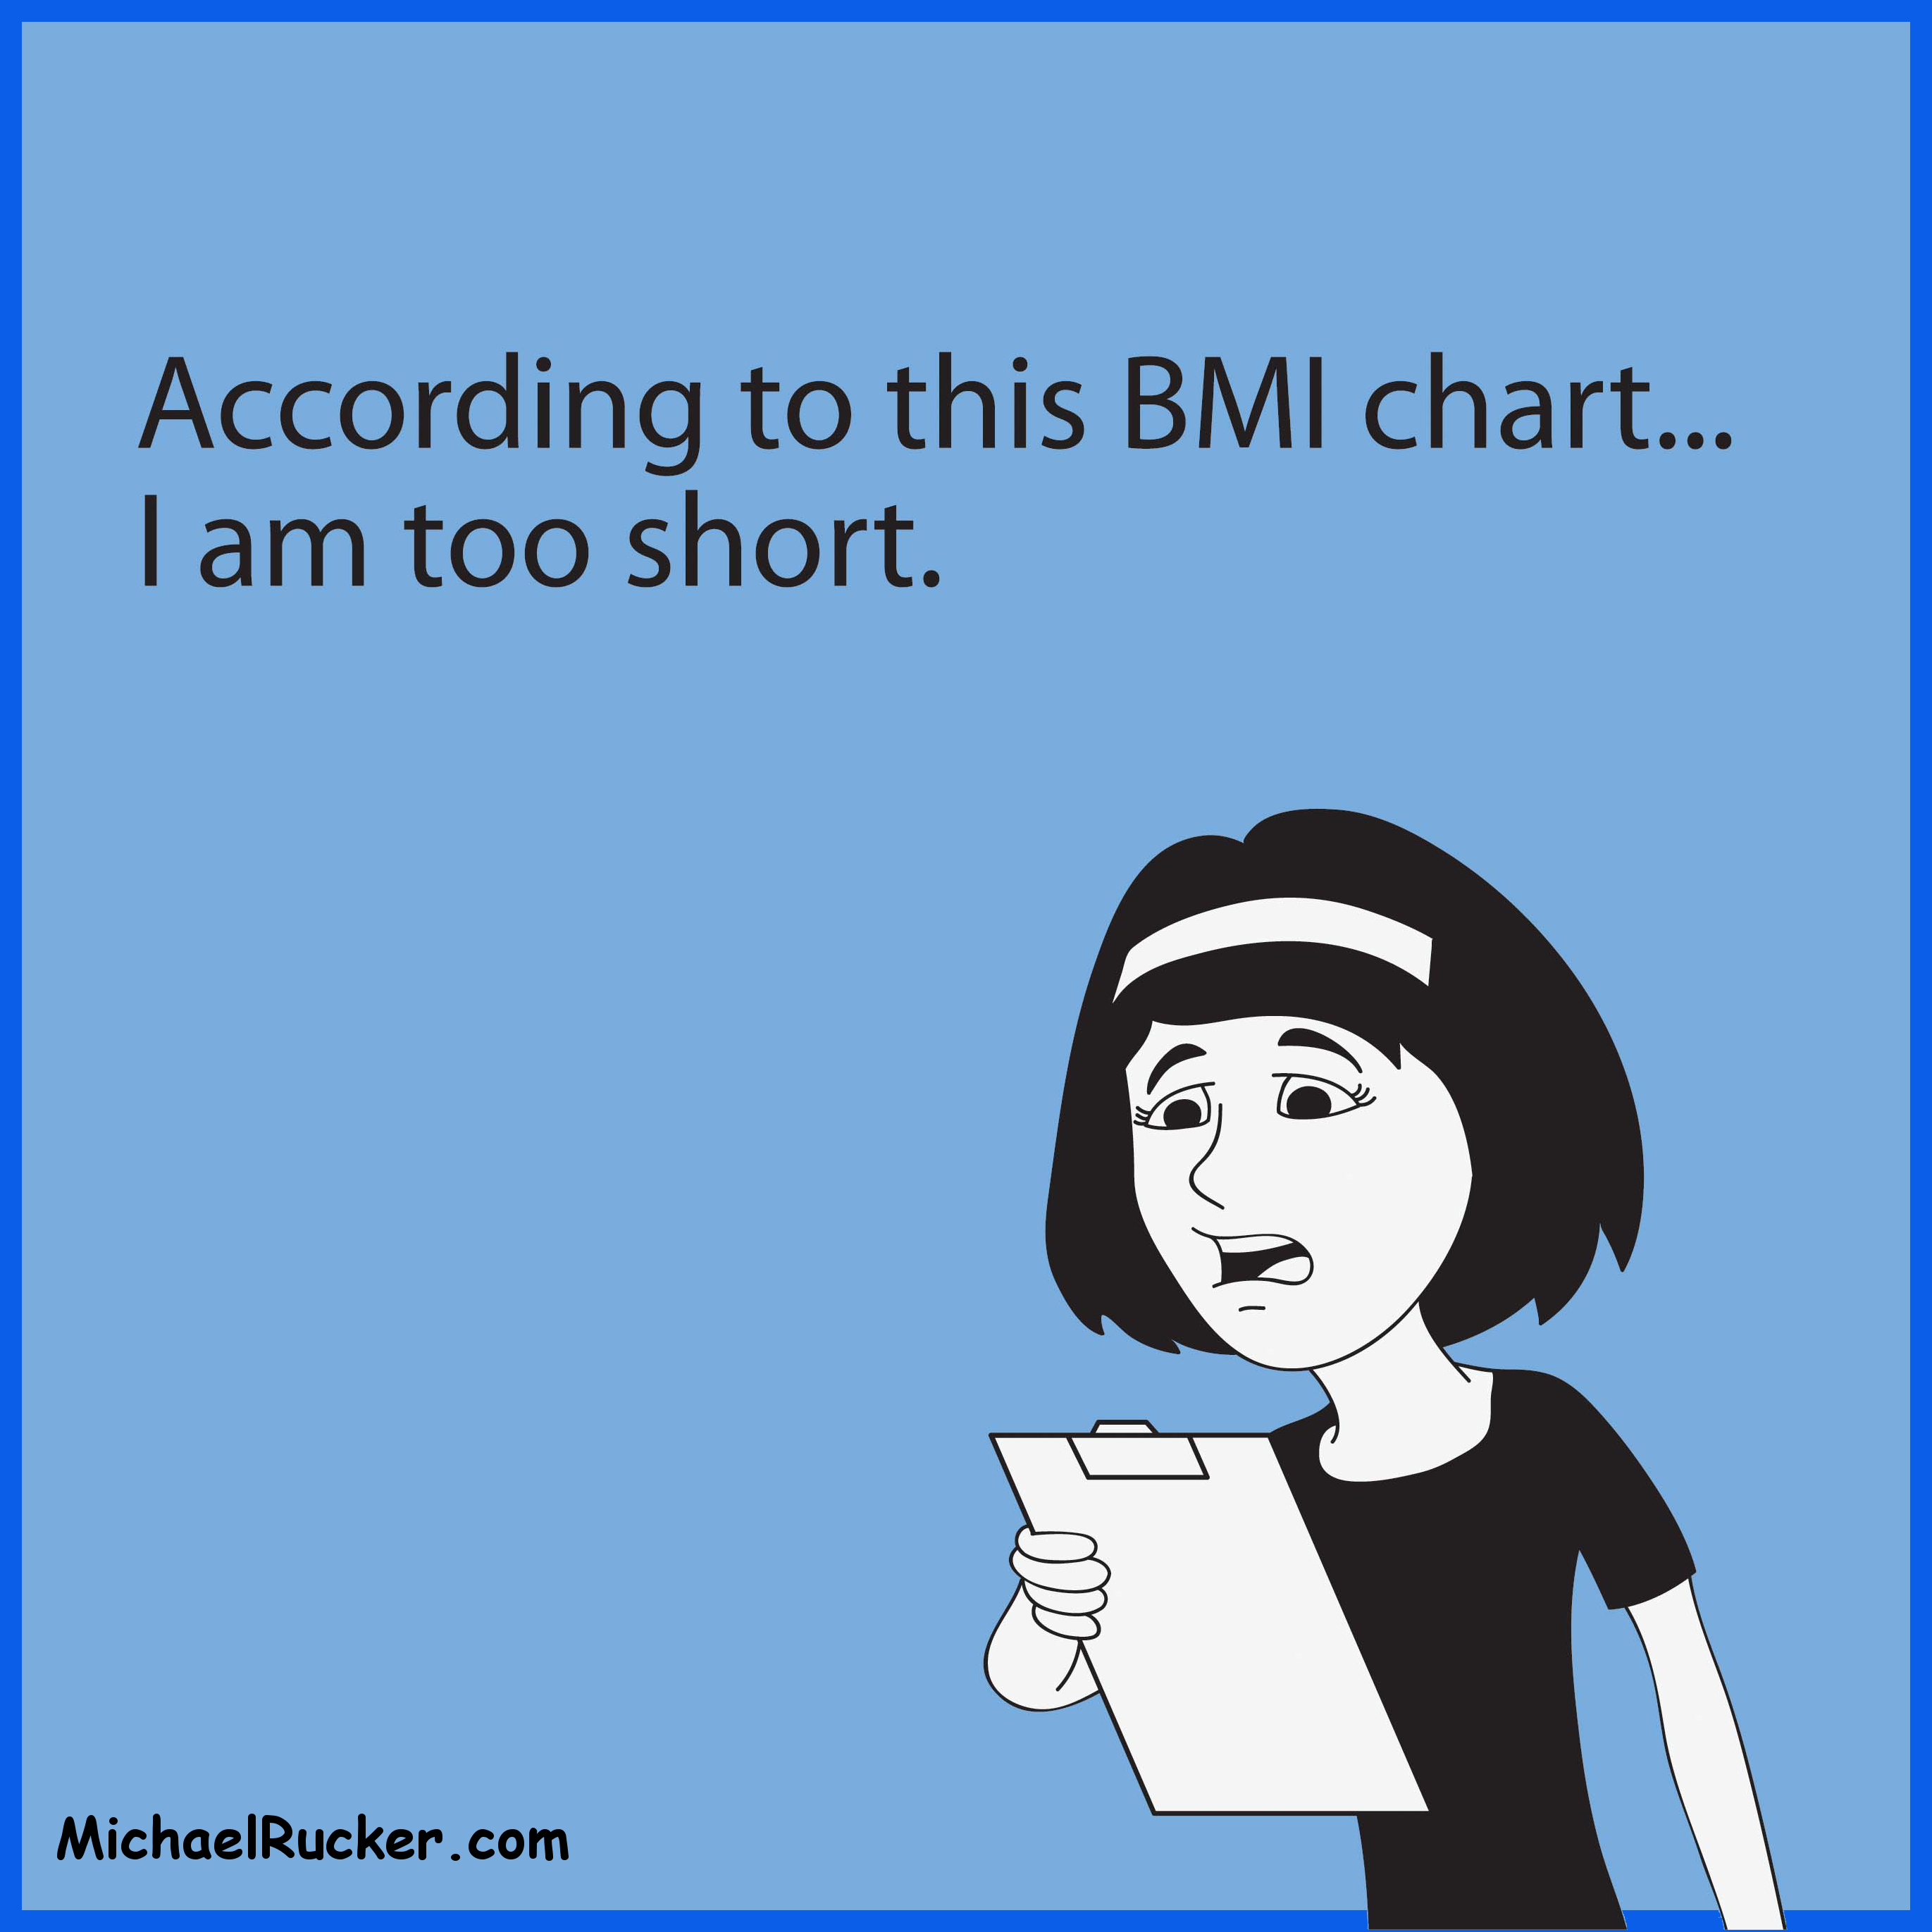 According to this BMI chart I am too short. | wellness humor